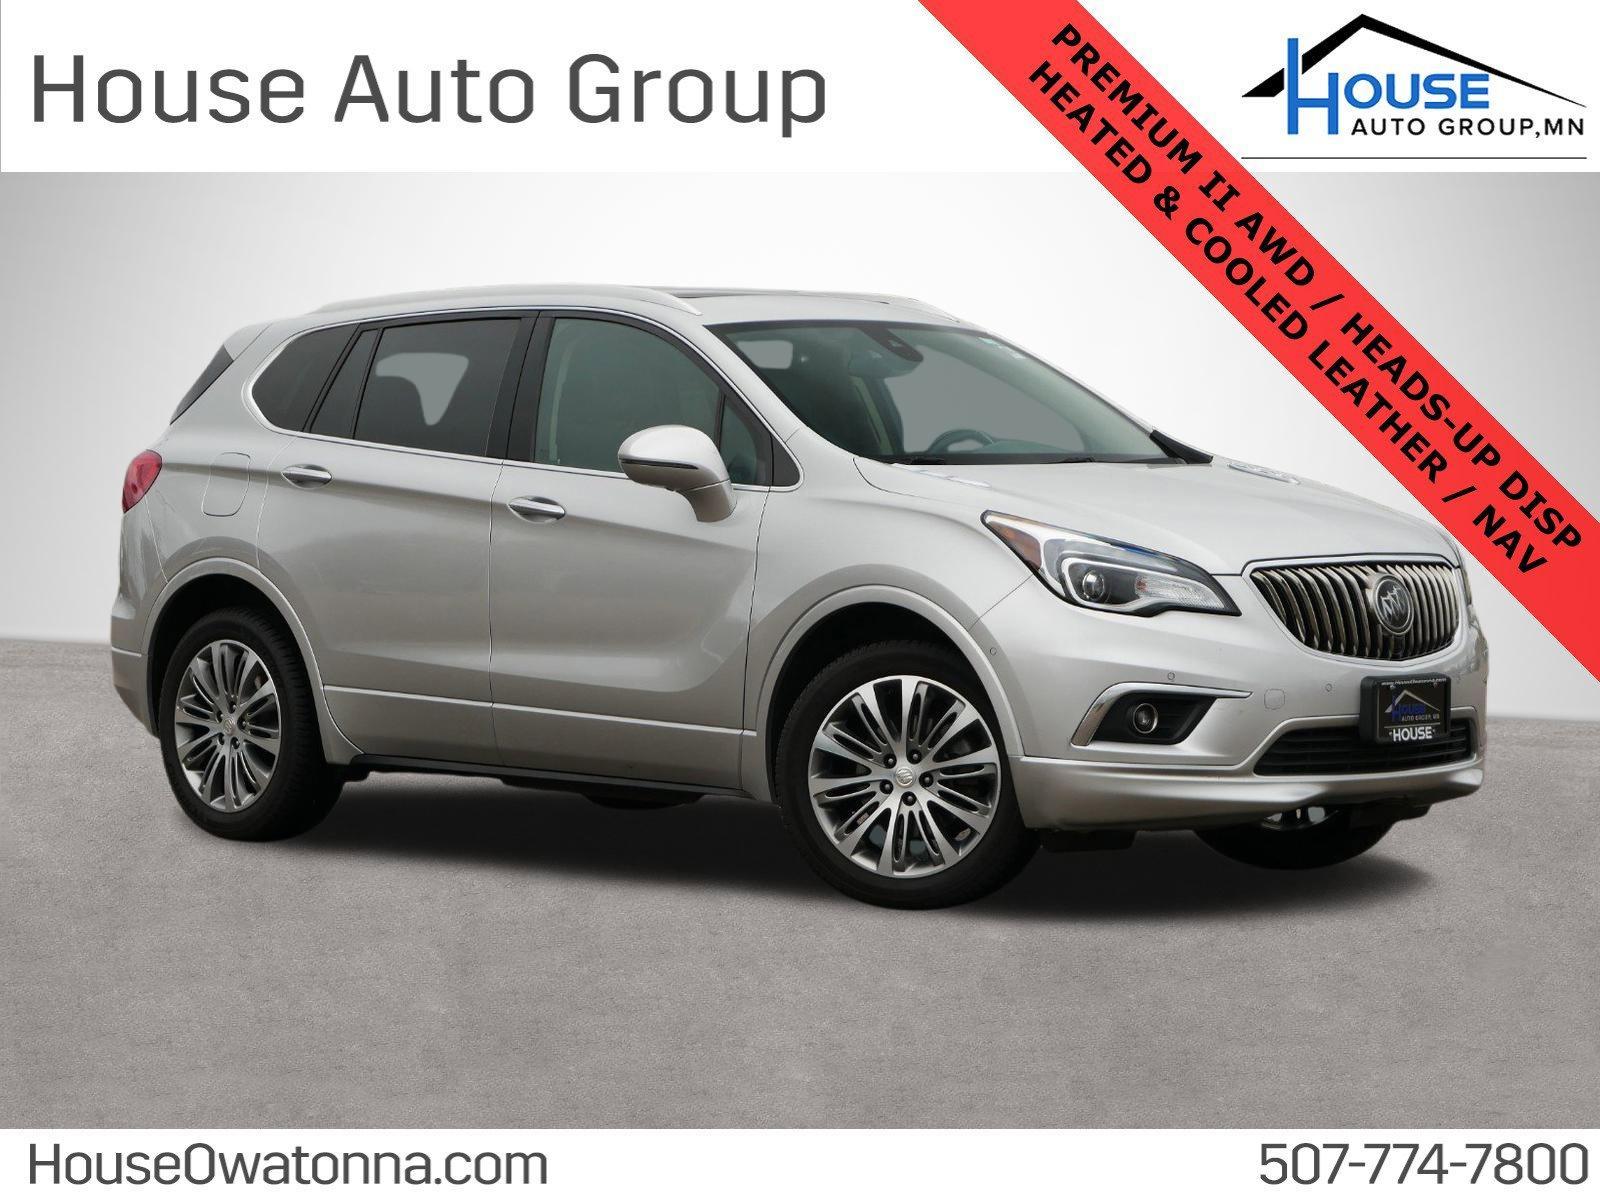 2017 Buick Envision Owatonna MN